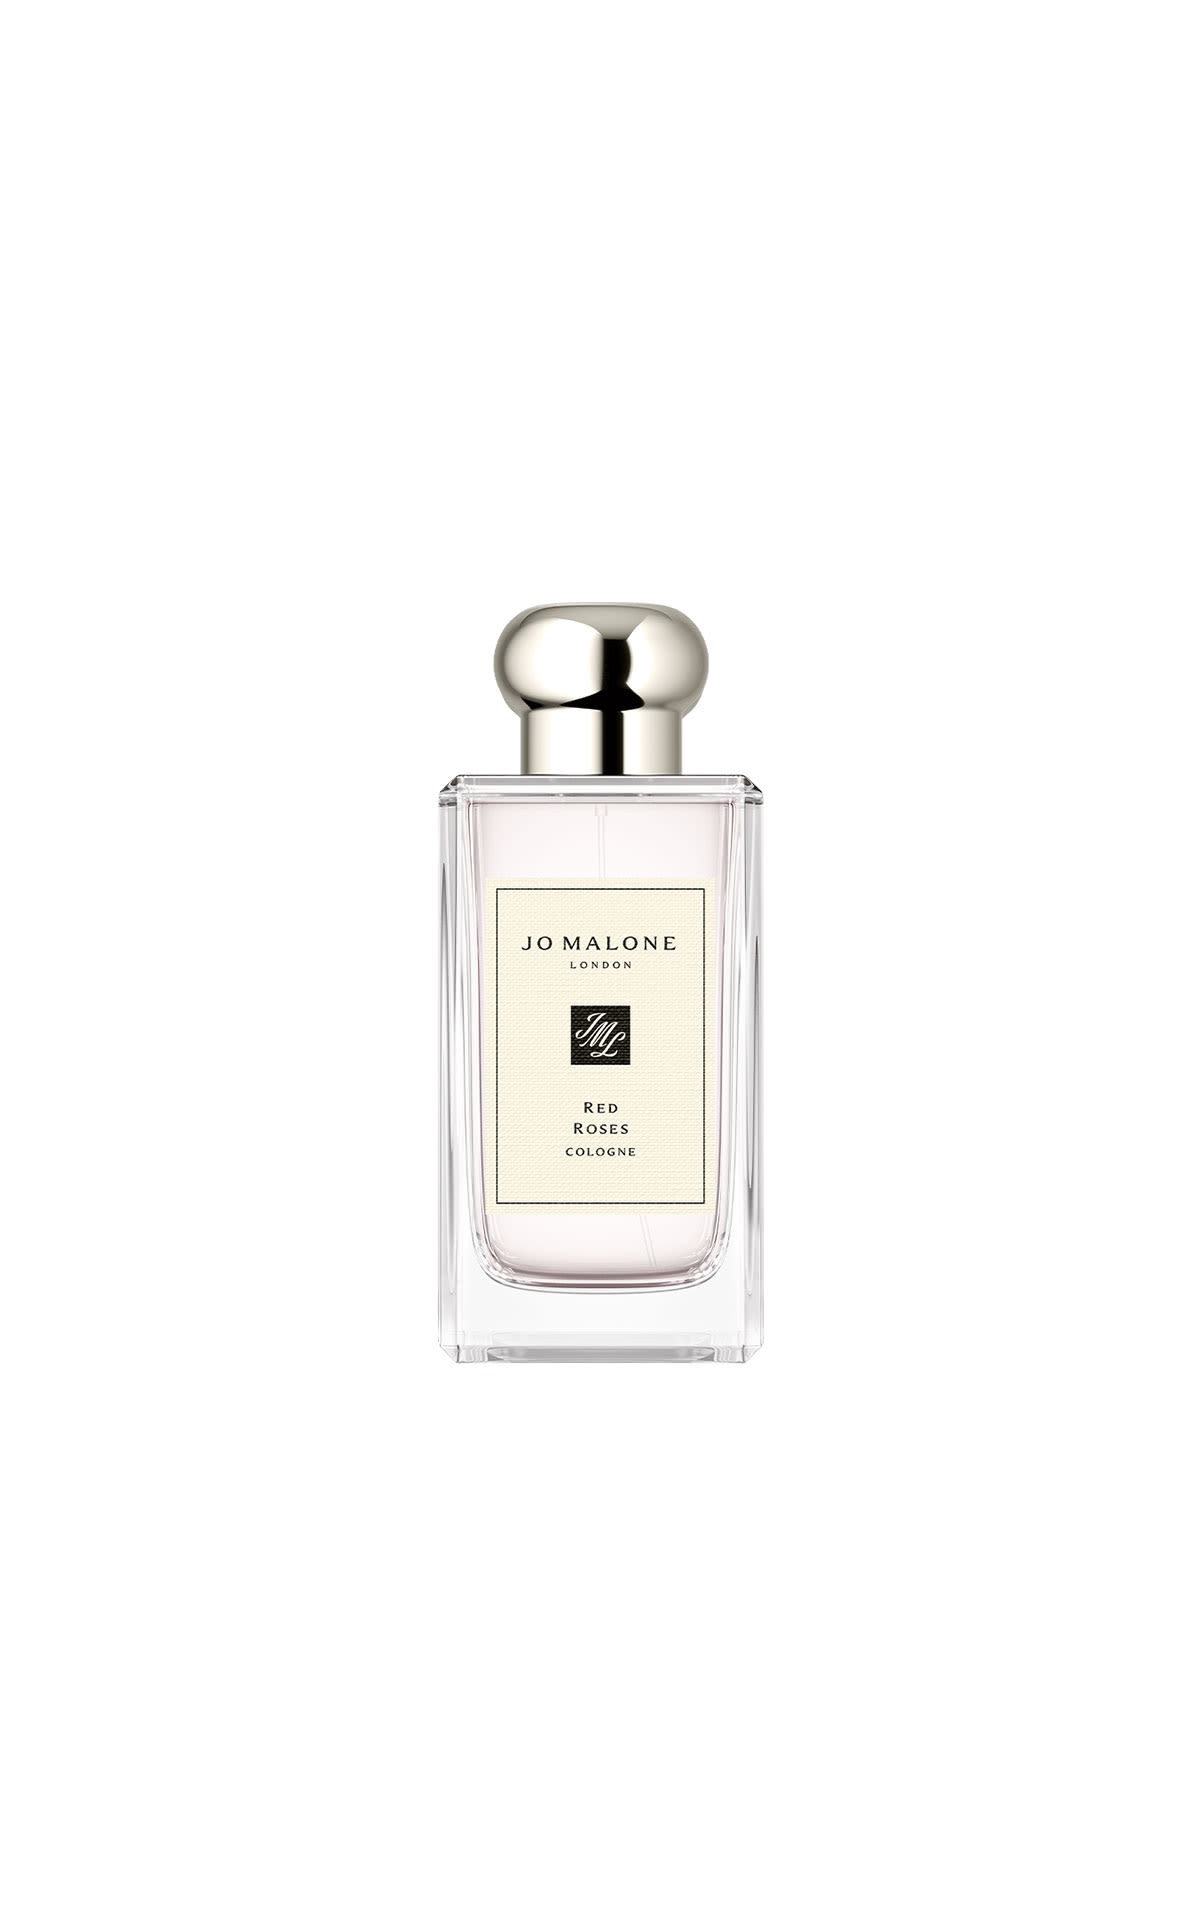 Jo Malone Red roses cologne 100ml from Bicester Village